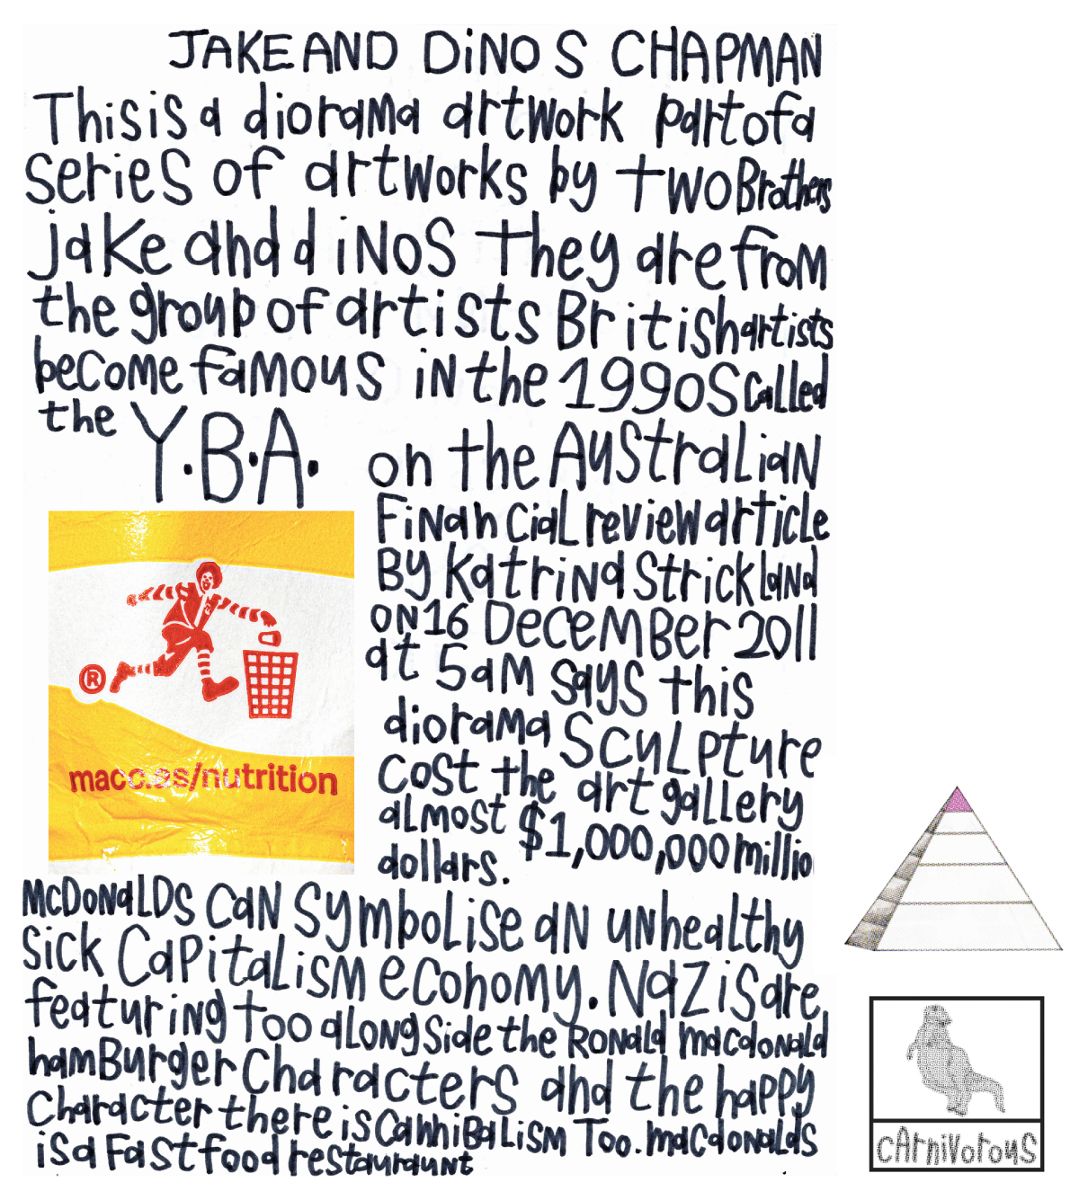 A collage of image and handwritten text. The image is a close-up photograph of a McDonalds cup label and the text describes an artwork by Jake and Dinos Chapman.